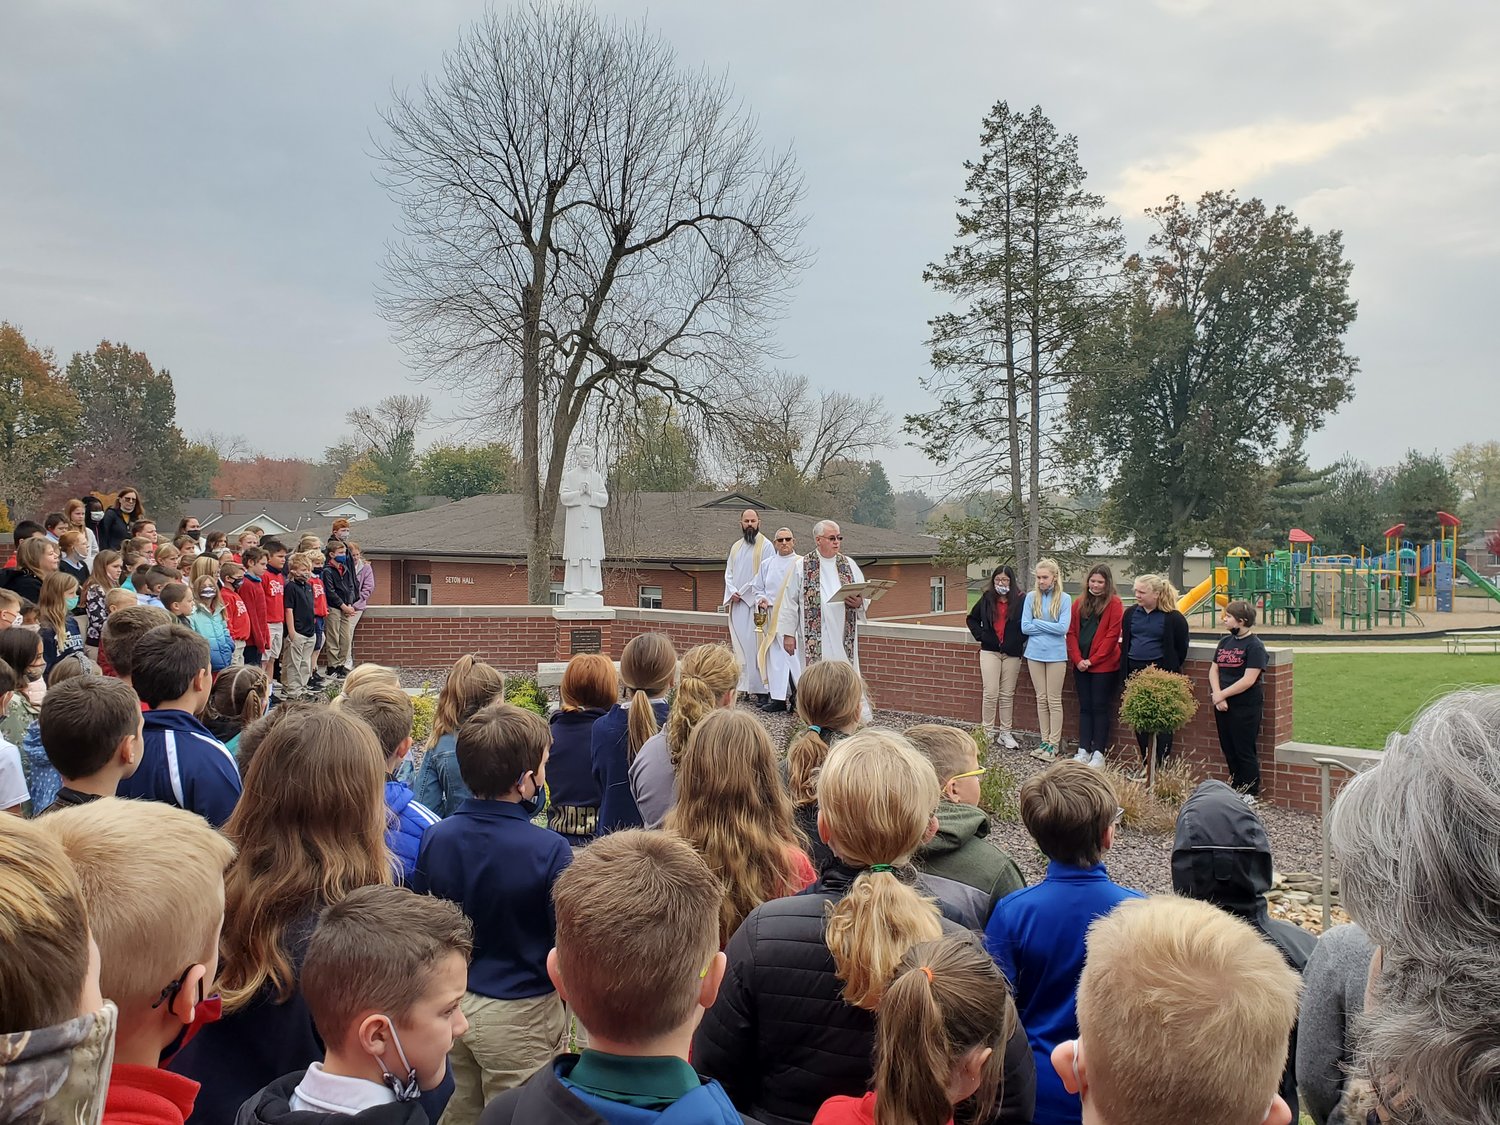 Monsignor Leo Enlow, pastor of St. Peter Parish in Quincy, Illinois, blesses the new Fr. Tolton Garden on the parish property, with students of St. Peter School watching.